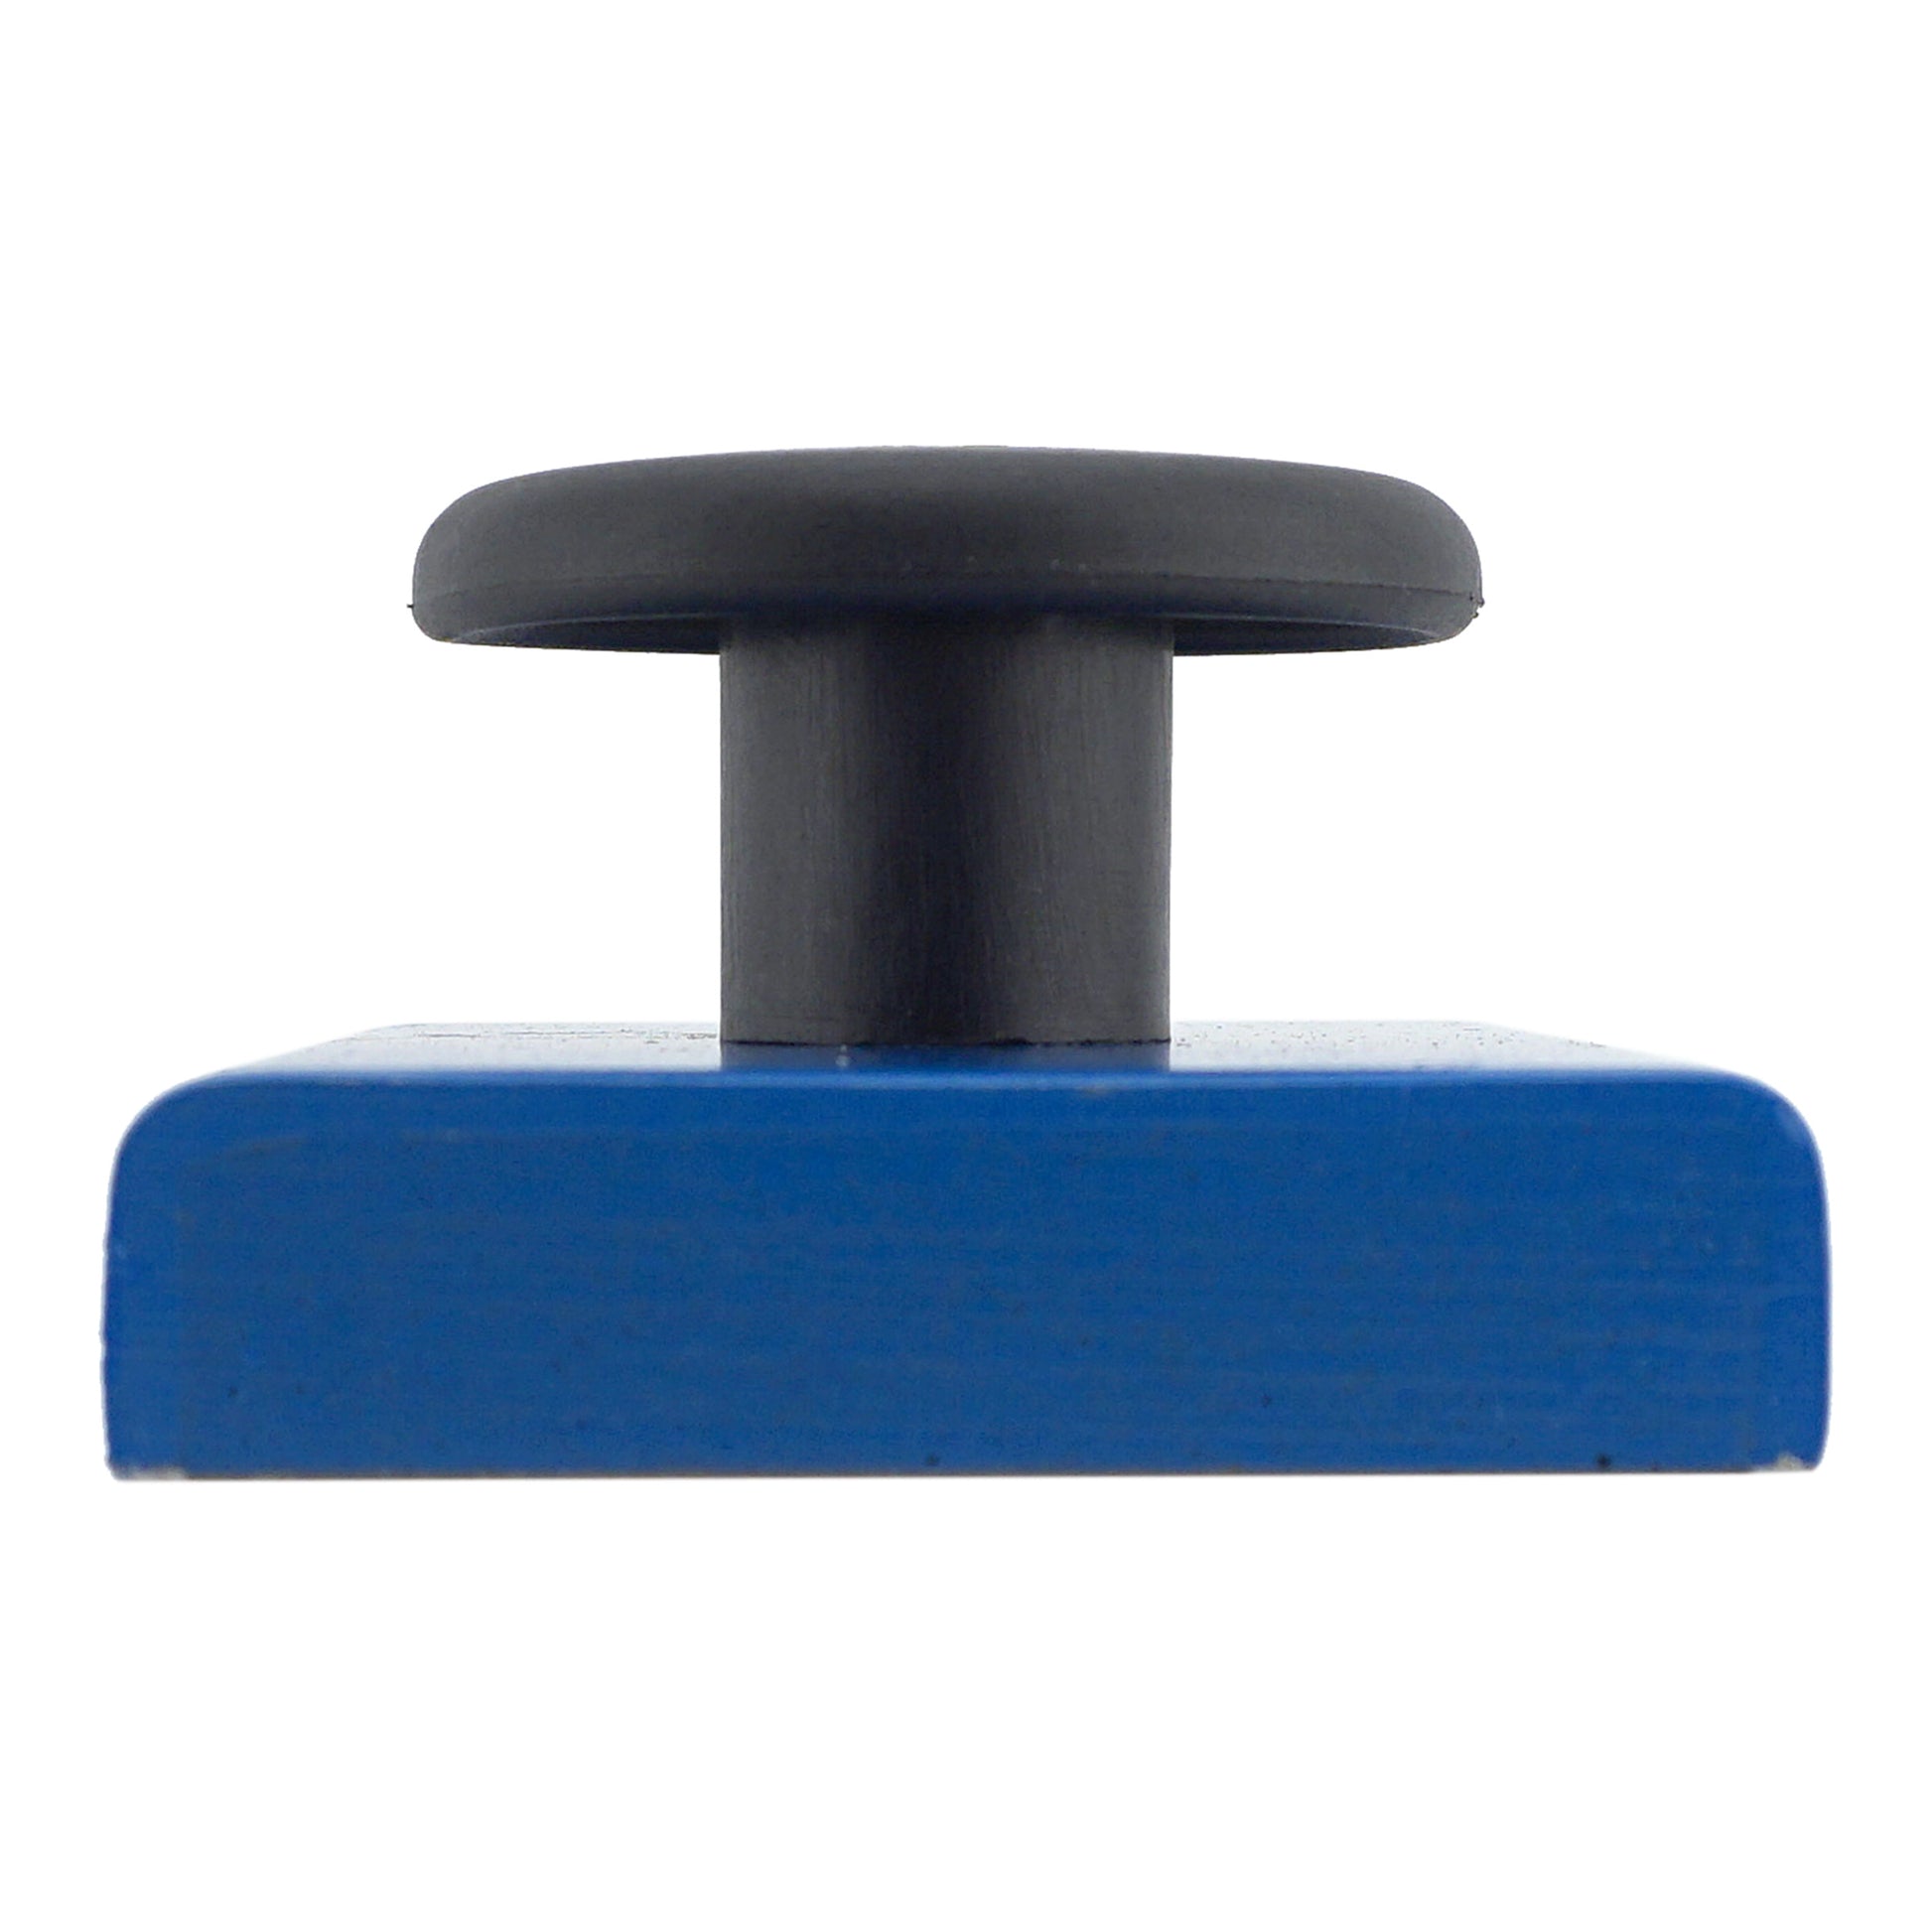 Load image into Gallery viewer, HMKS-E Ceramic Rectangular Base Magnet with Knob - Side View